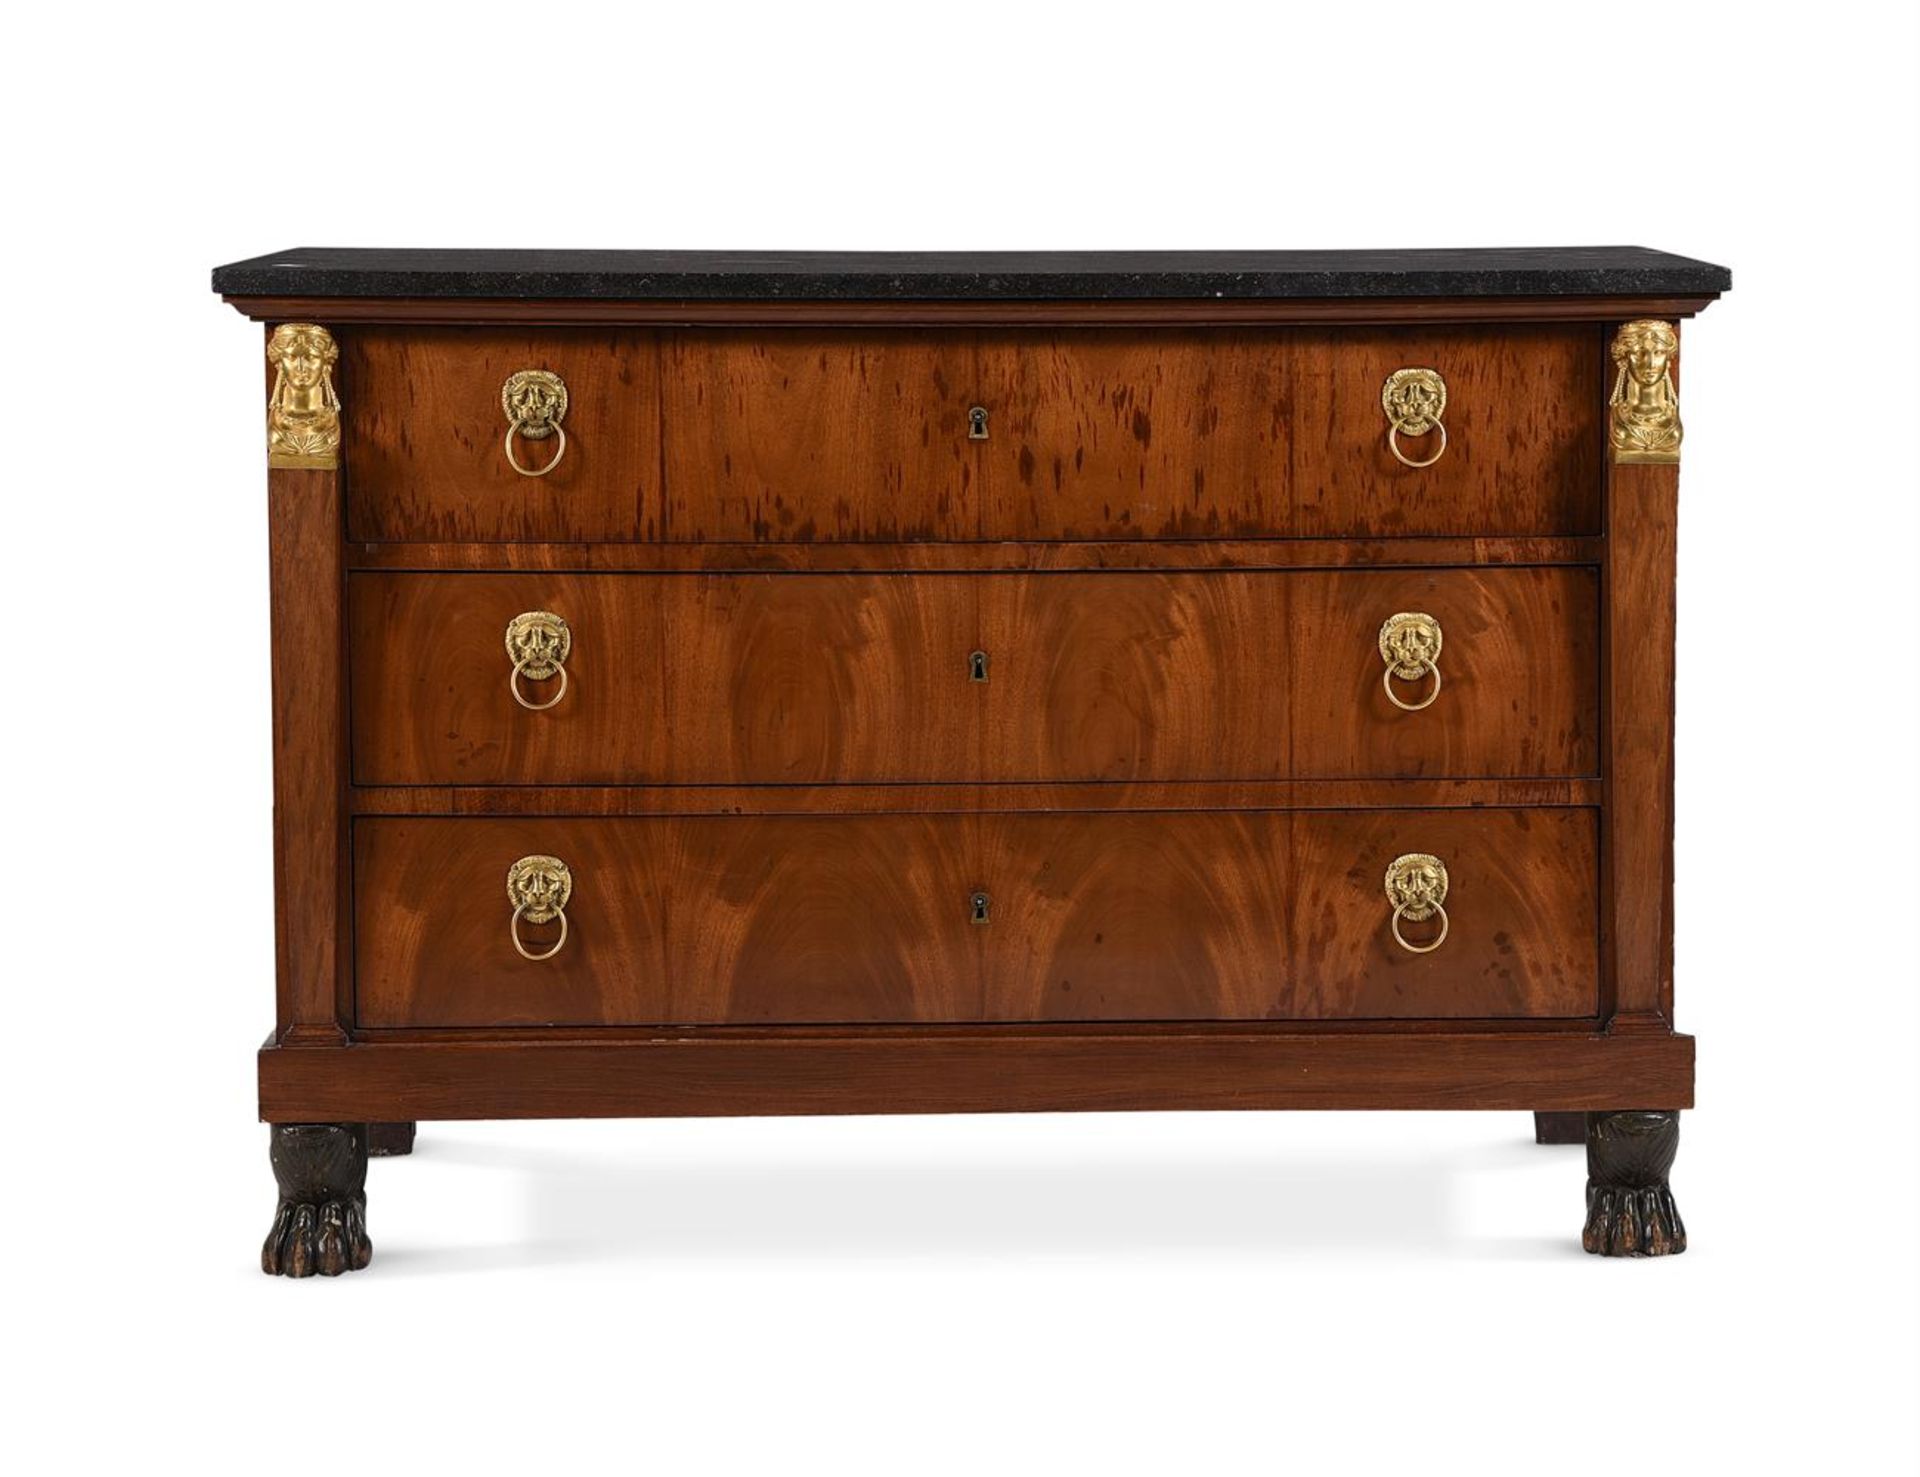 AN EMPIRE MAHOGANY, GILT METAL MOUNTED AND MARBLE TOPPED SECRETAIRE ABBATTANT AND COMMODE EN SUITE - Image 3 of 10